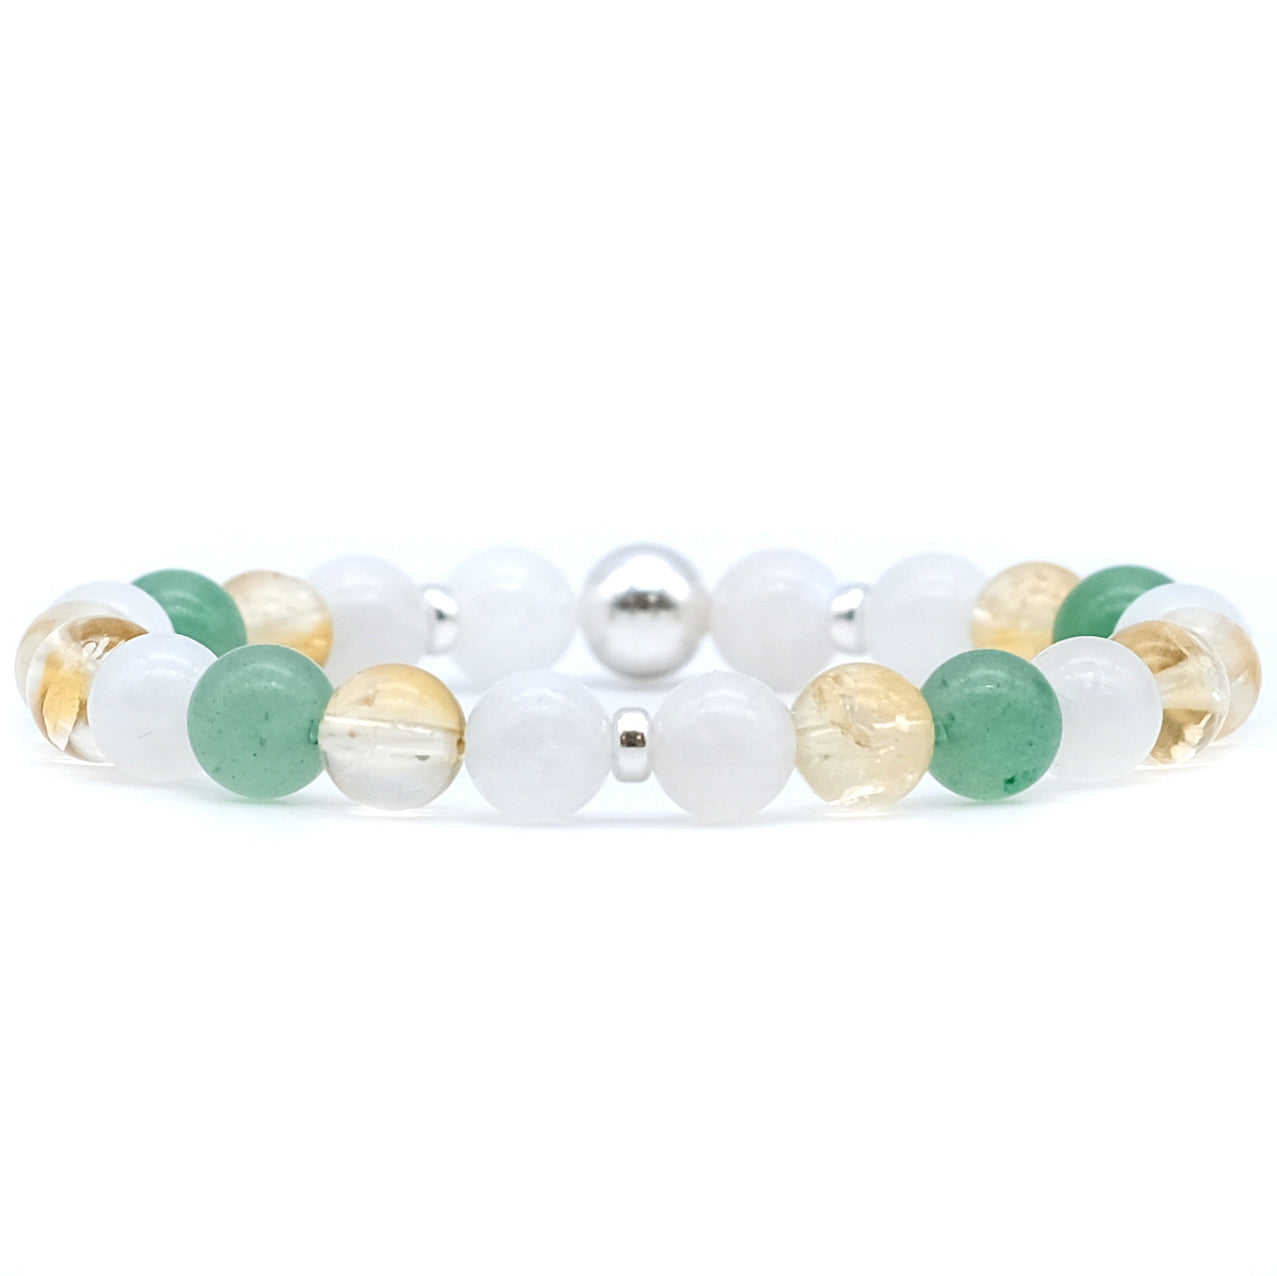 An aventurine, moonstone and citrine gemstone bracelet with silver accessories